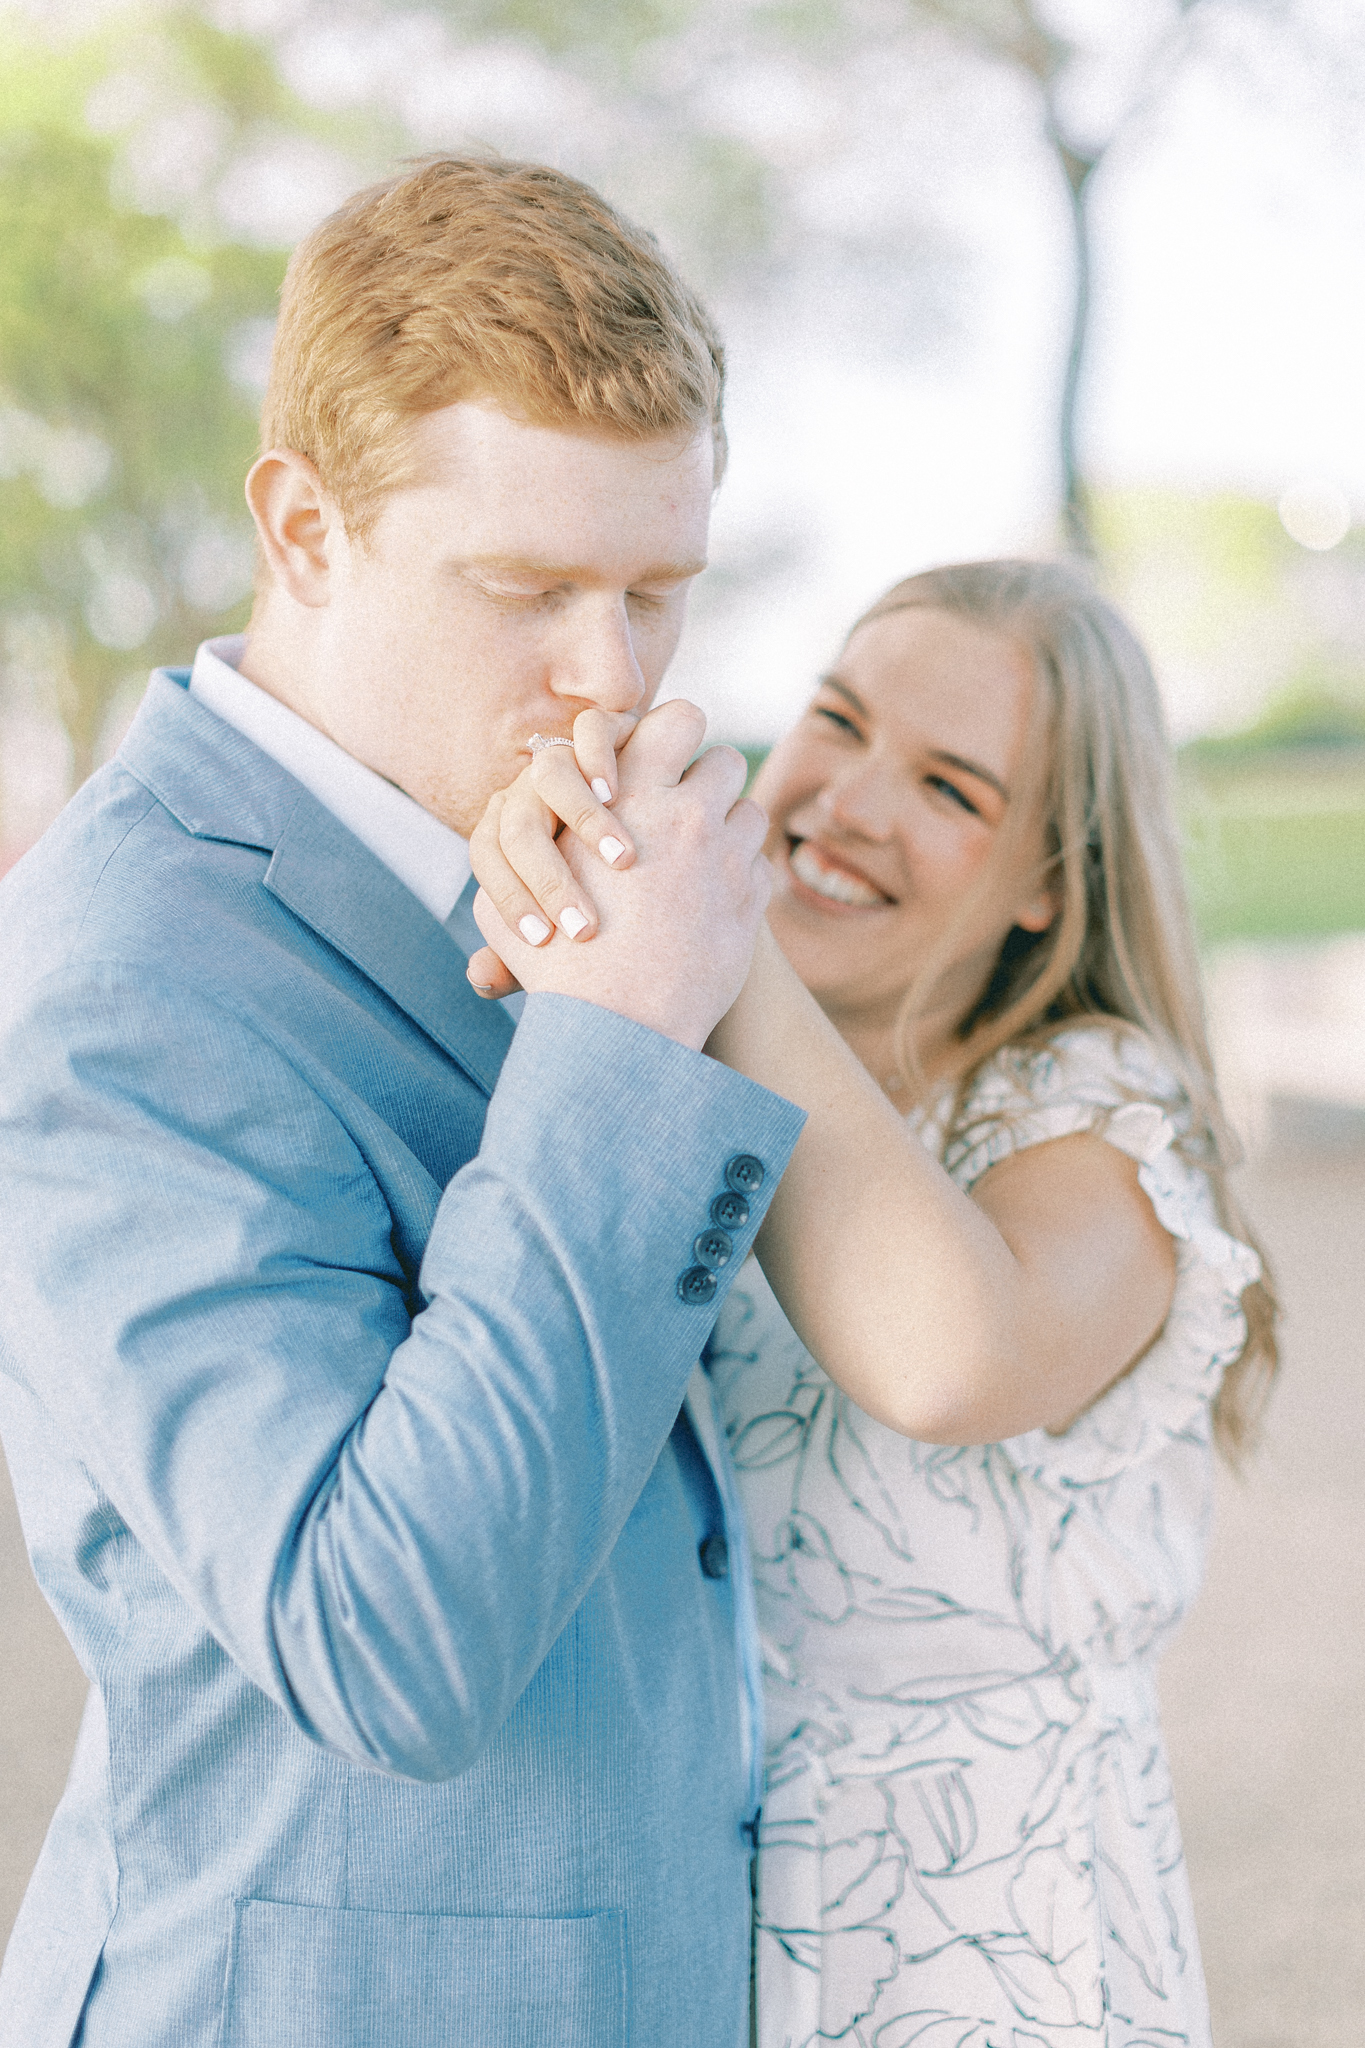 downtown-chicago-lincoln-park-lake-michigan-engagement-session-hayley-moore-photography